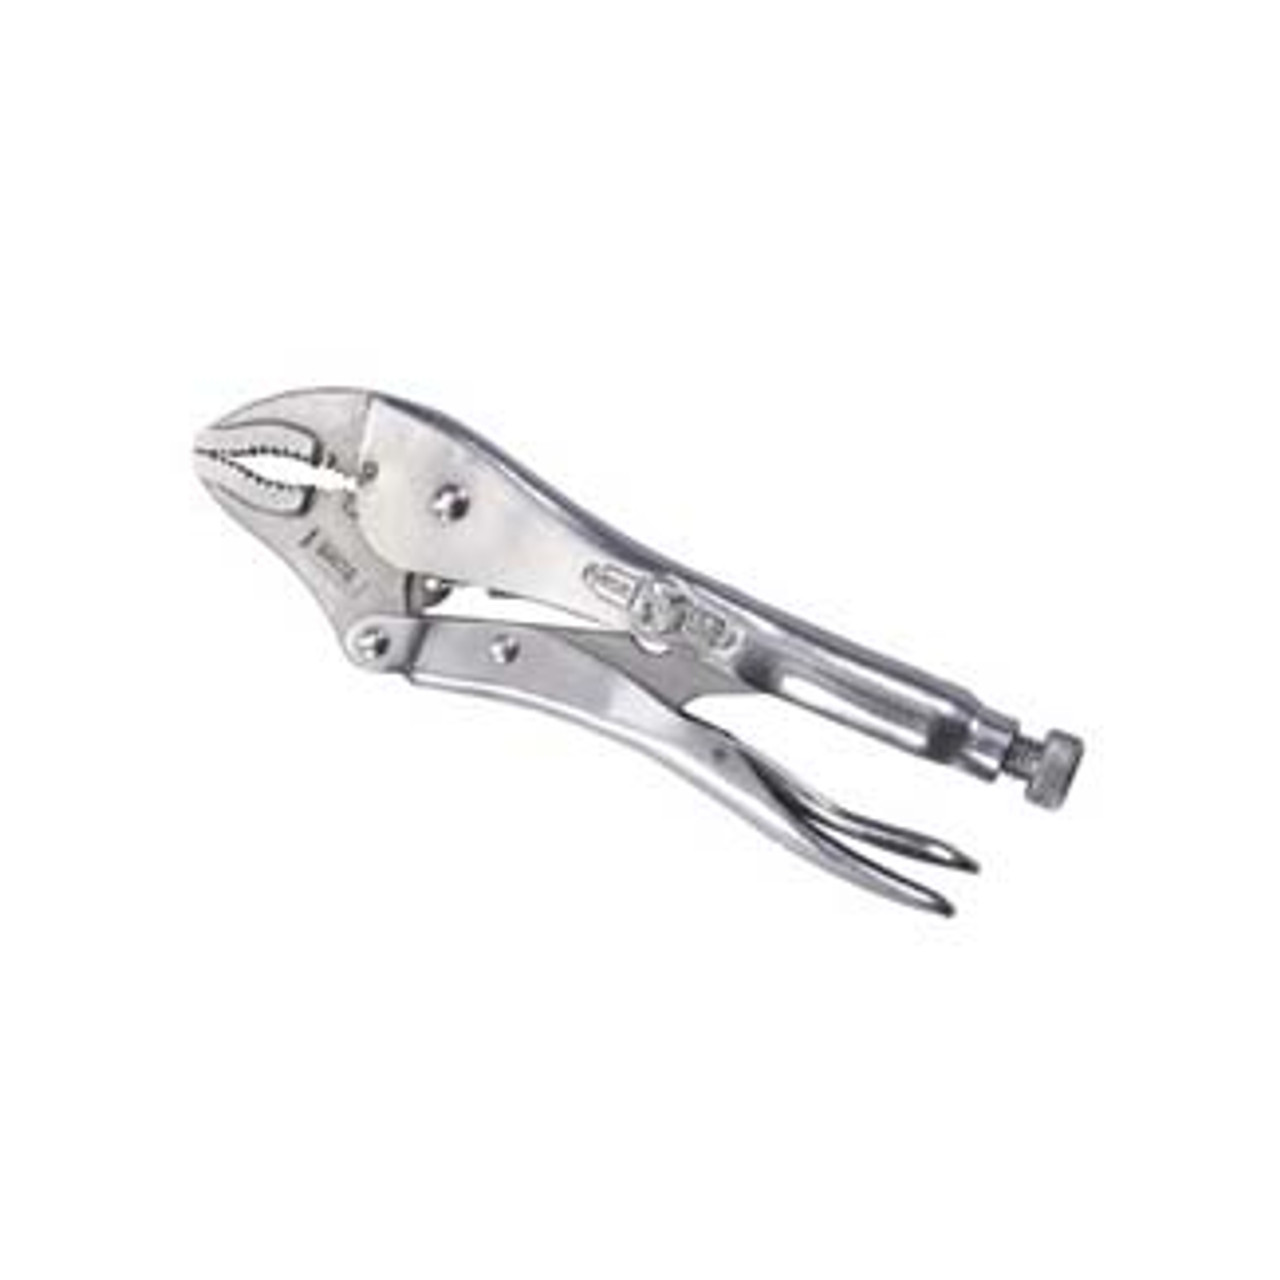 10 in. Adjustable Curved Jaw Locking Pliers